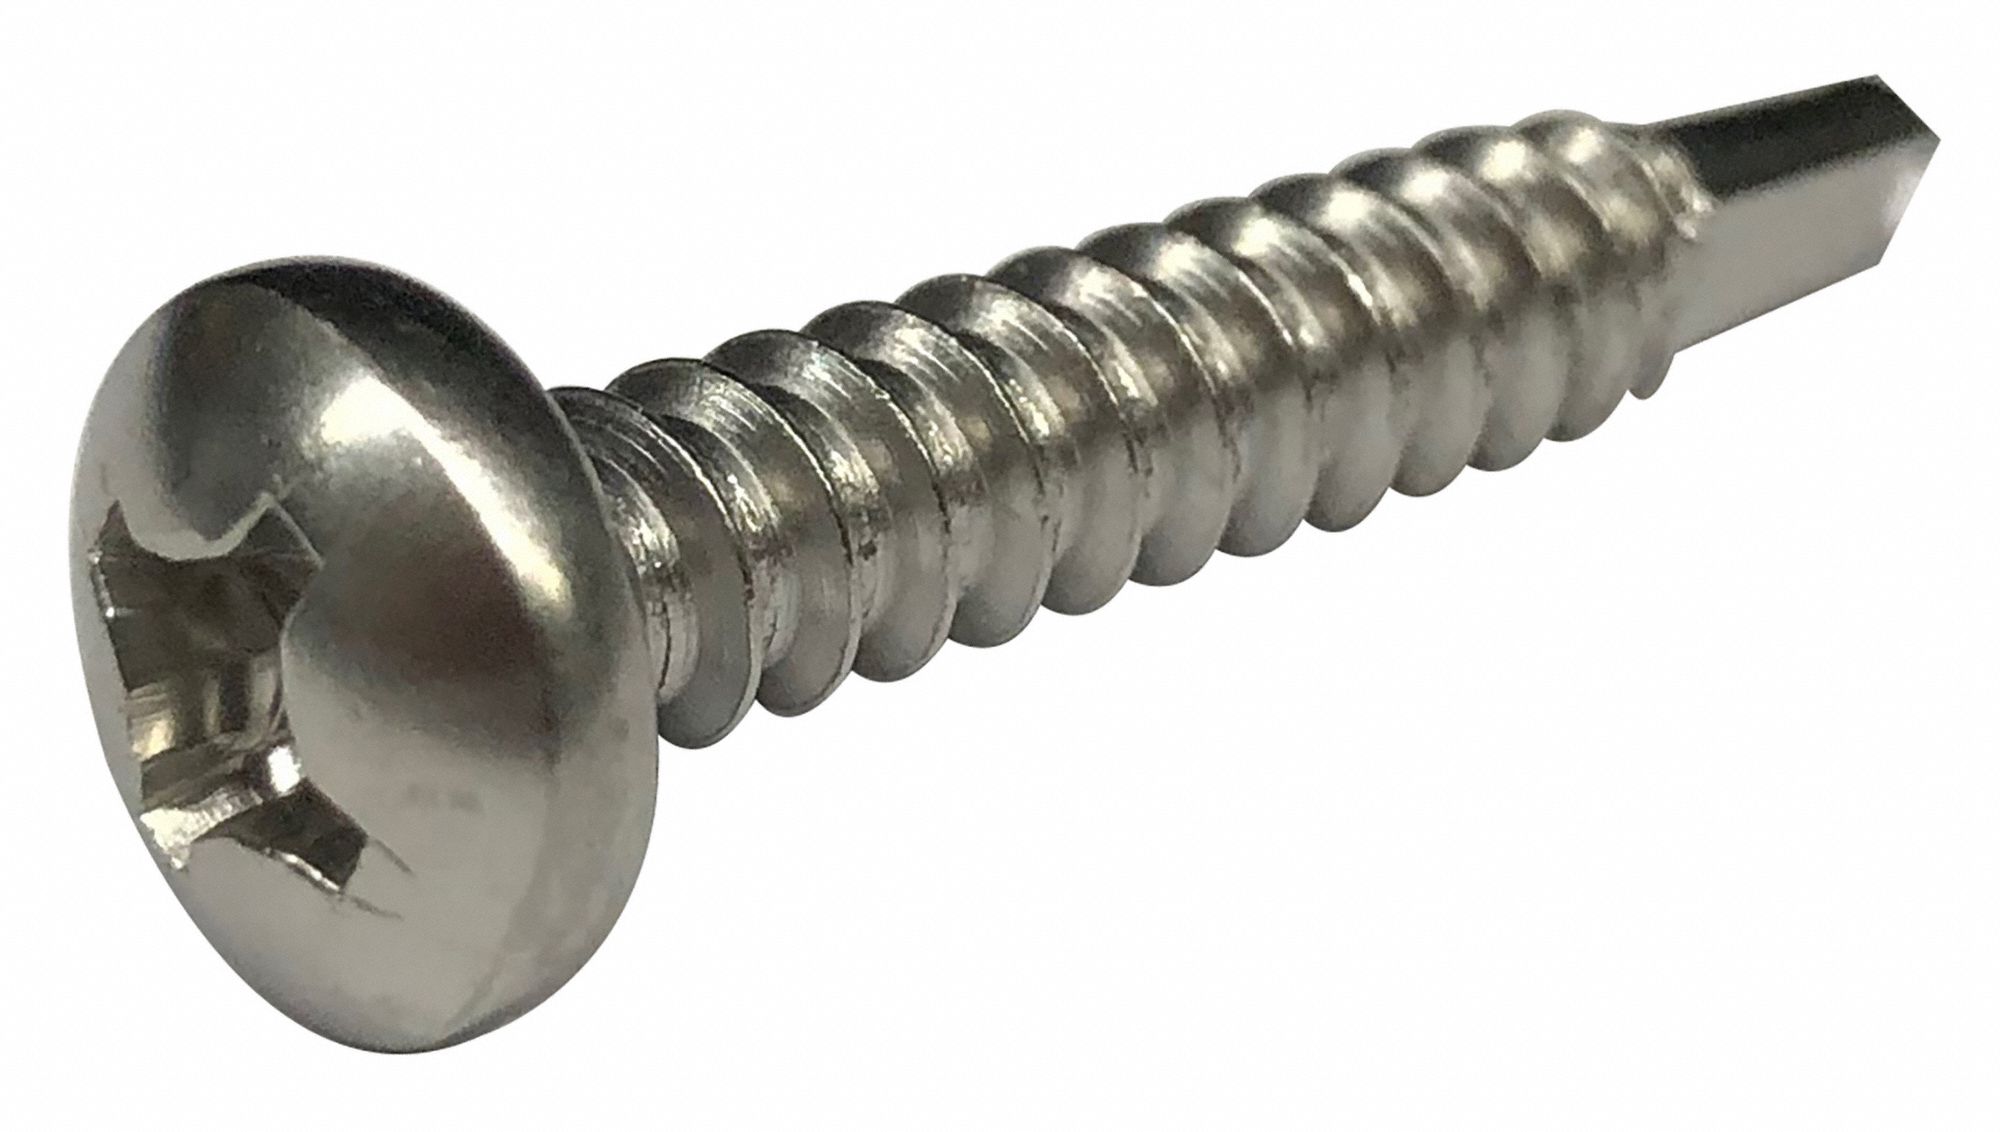 Type 23 Slotted Drive Steel Thread Cutting Screw 1 Length #10-32 Thread Size Hex Washer Head Pack of 50 Zinc Plated Finish 